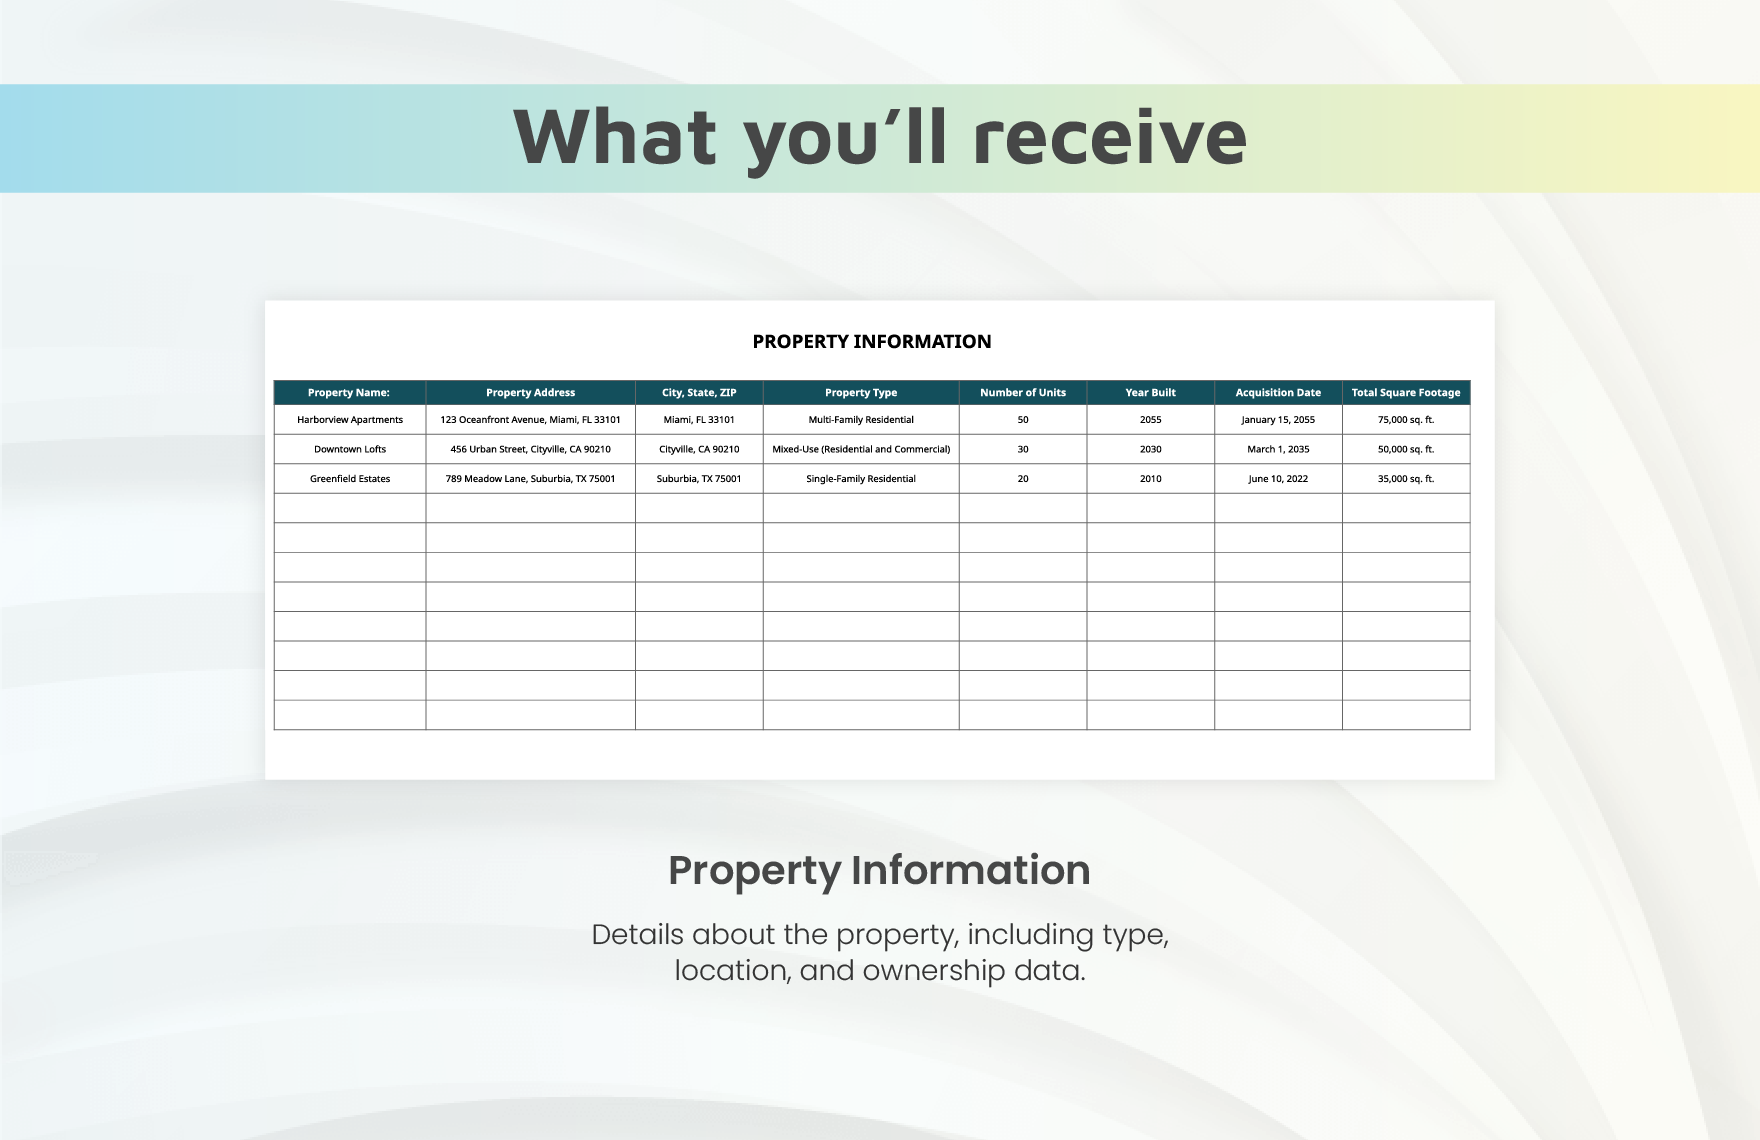 Real Estate Proforma Template in Excel Google Sheets Download